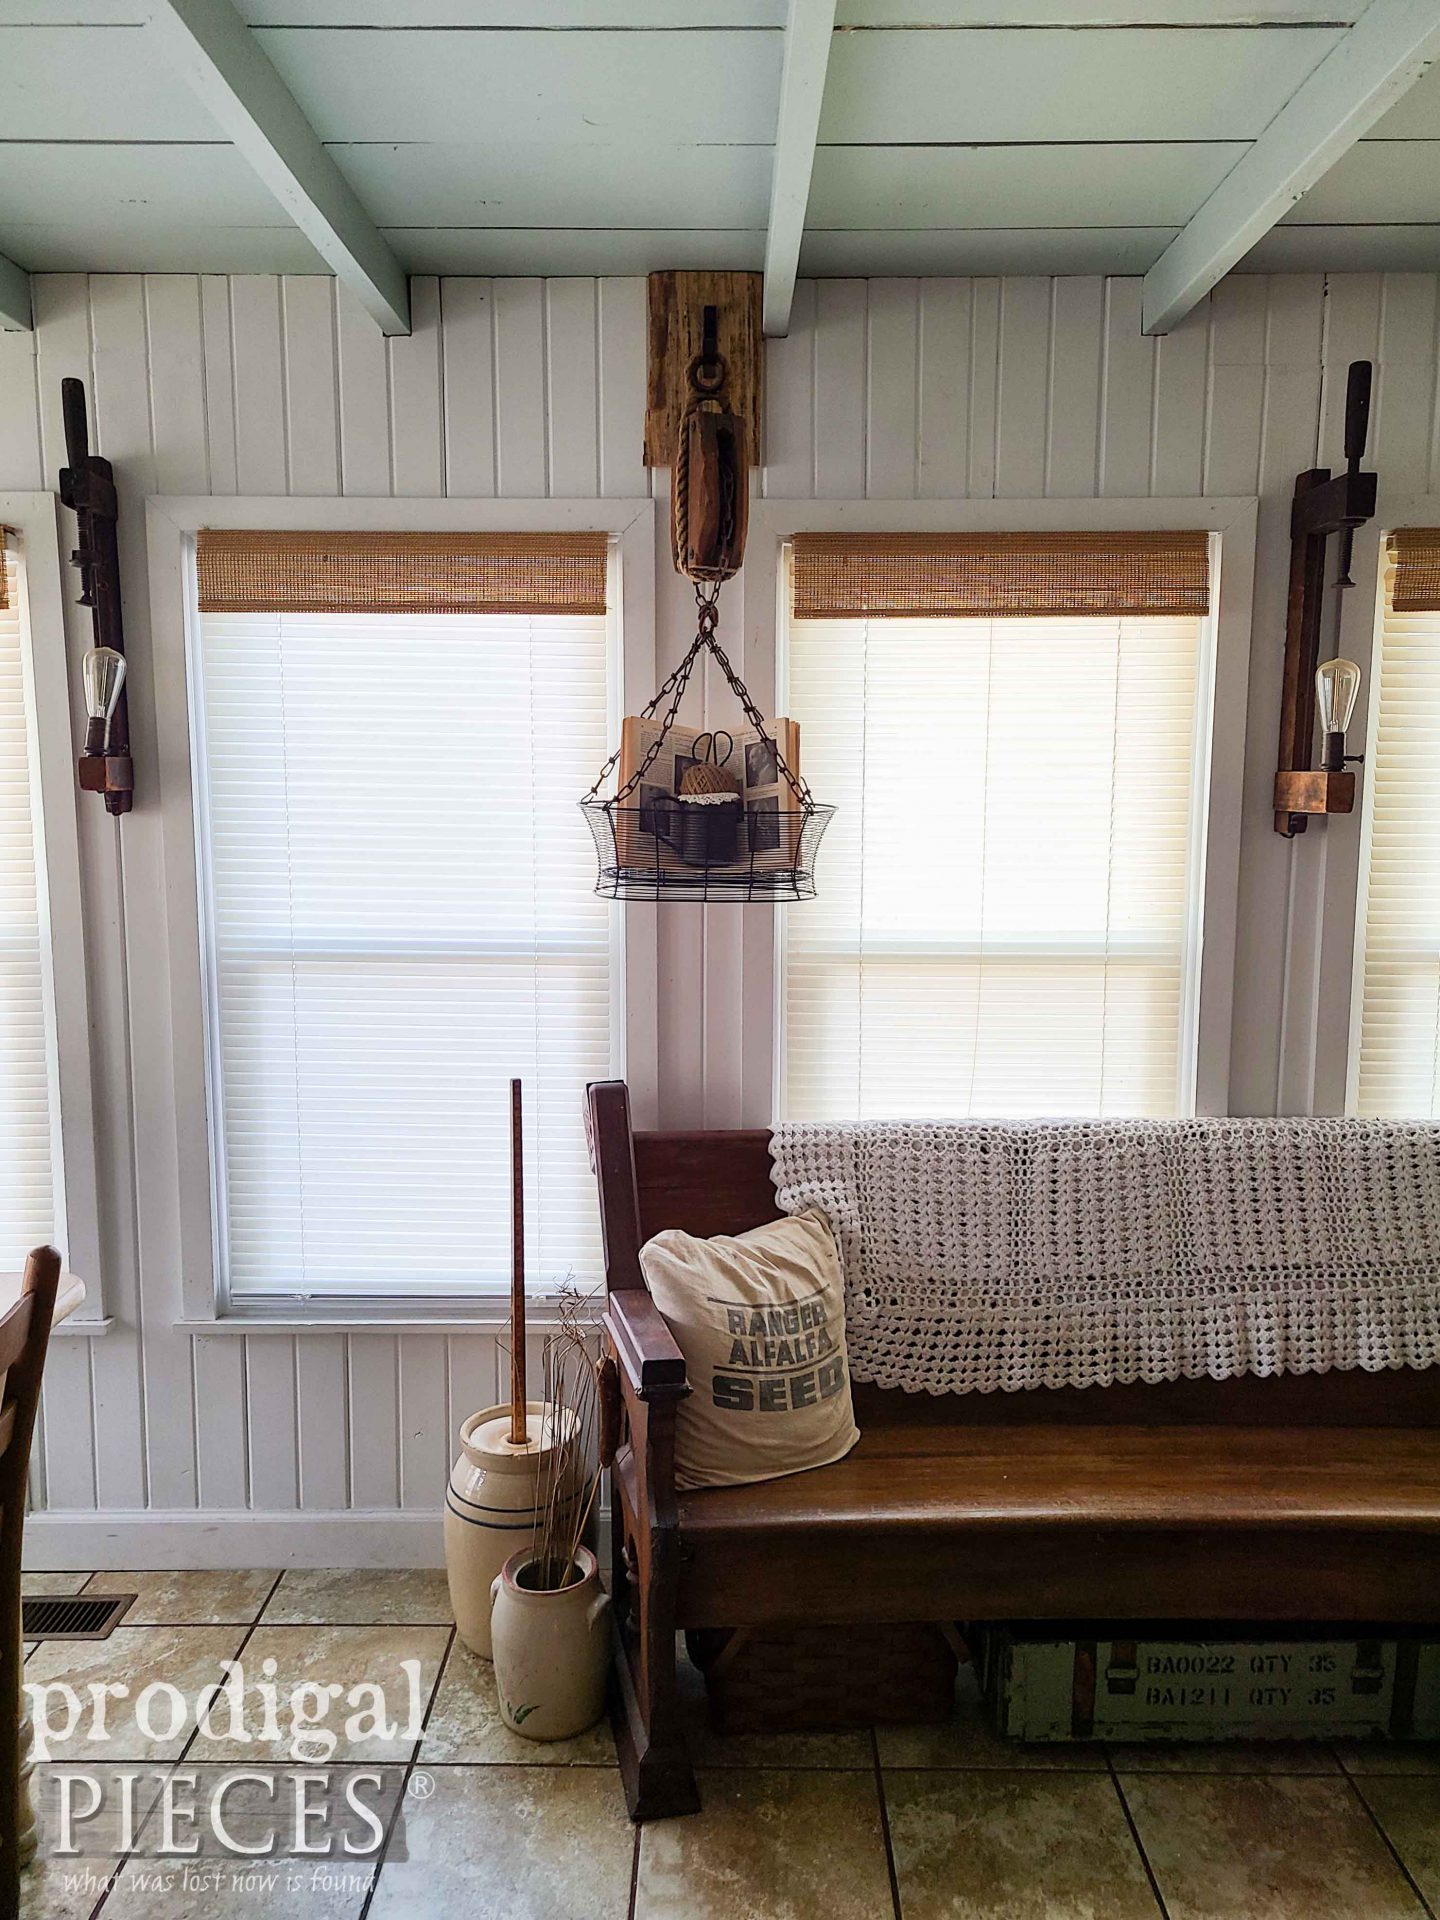 Antique Farmhouse Pulley with Hanging Thrifed Basket Makeover by Larissa of Prodigal Pieces | prodigalpieces.com #prodigalpieces #farmhouse #diy #upcycled #homedecor